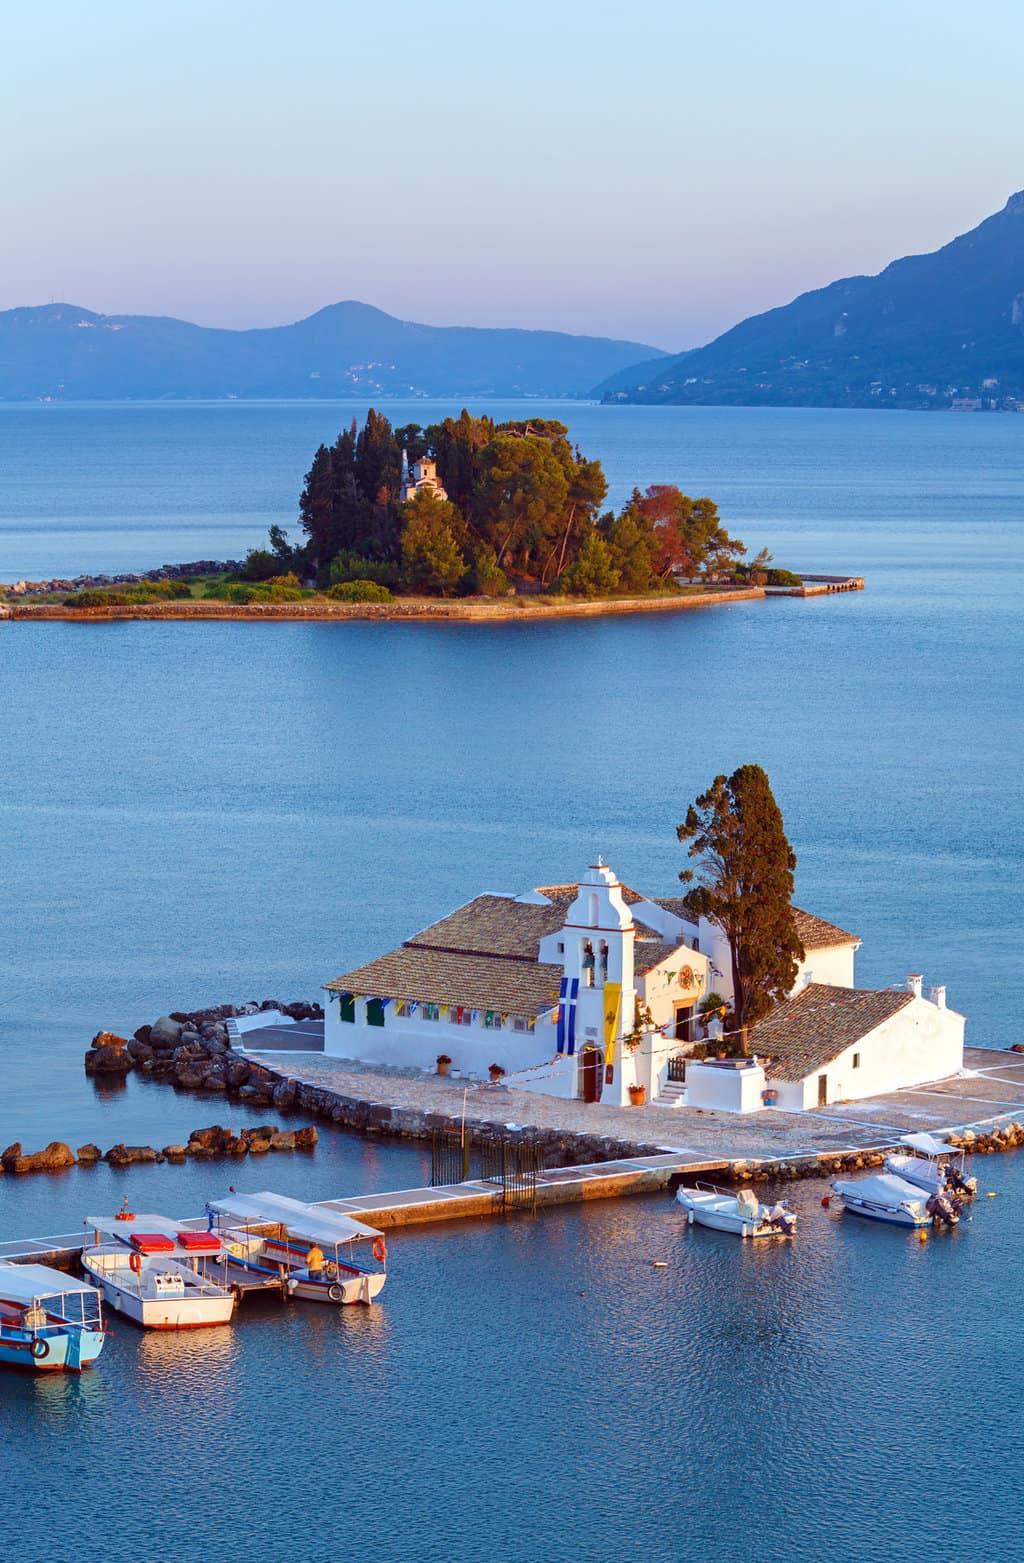 Two small islands with typical Greek churches sit in the middle of calm, blue ocean. Boats are moored in front of the closest island. 